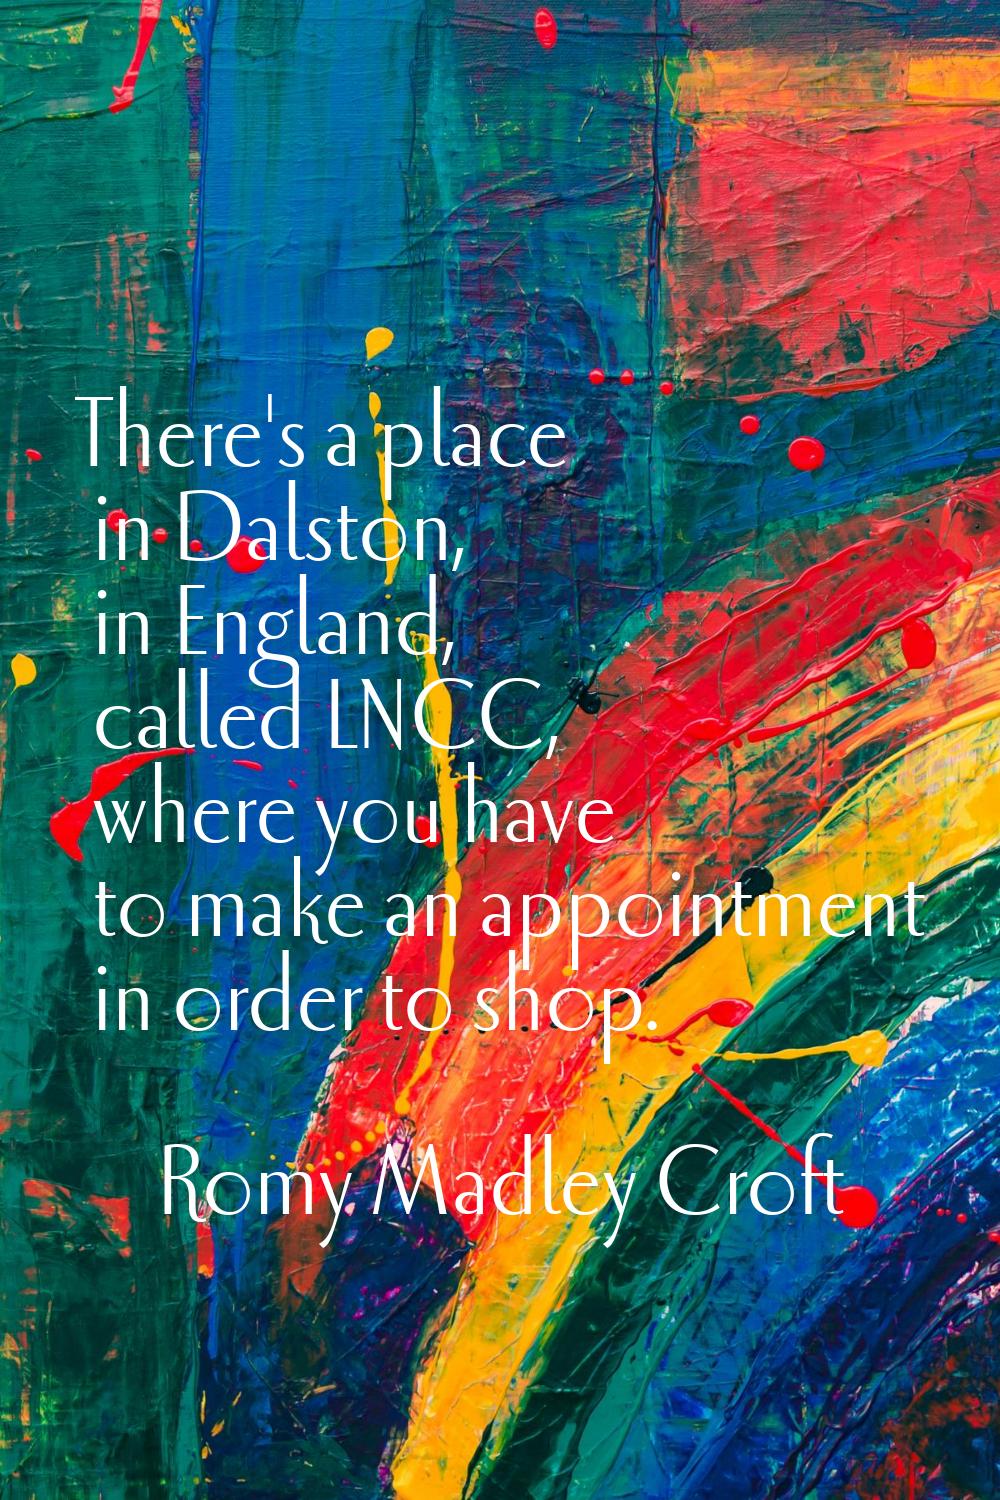 There's a place in Dalston, in England, called LNCC, where you have to make an appointment in order